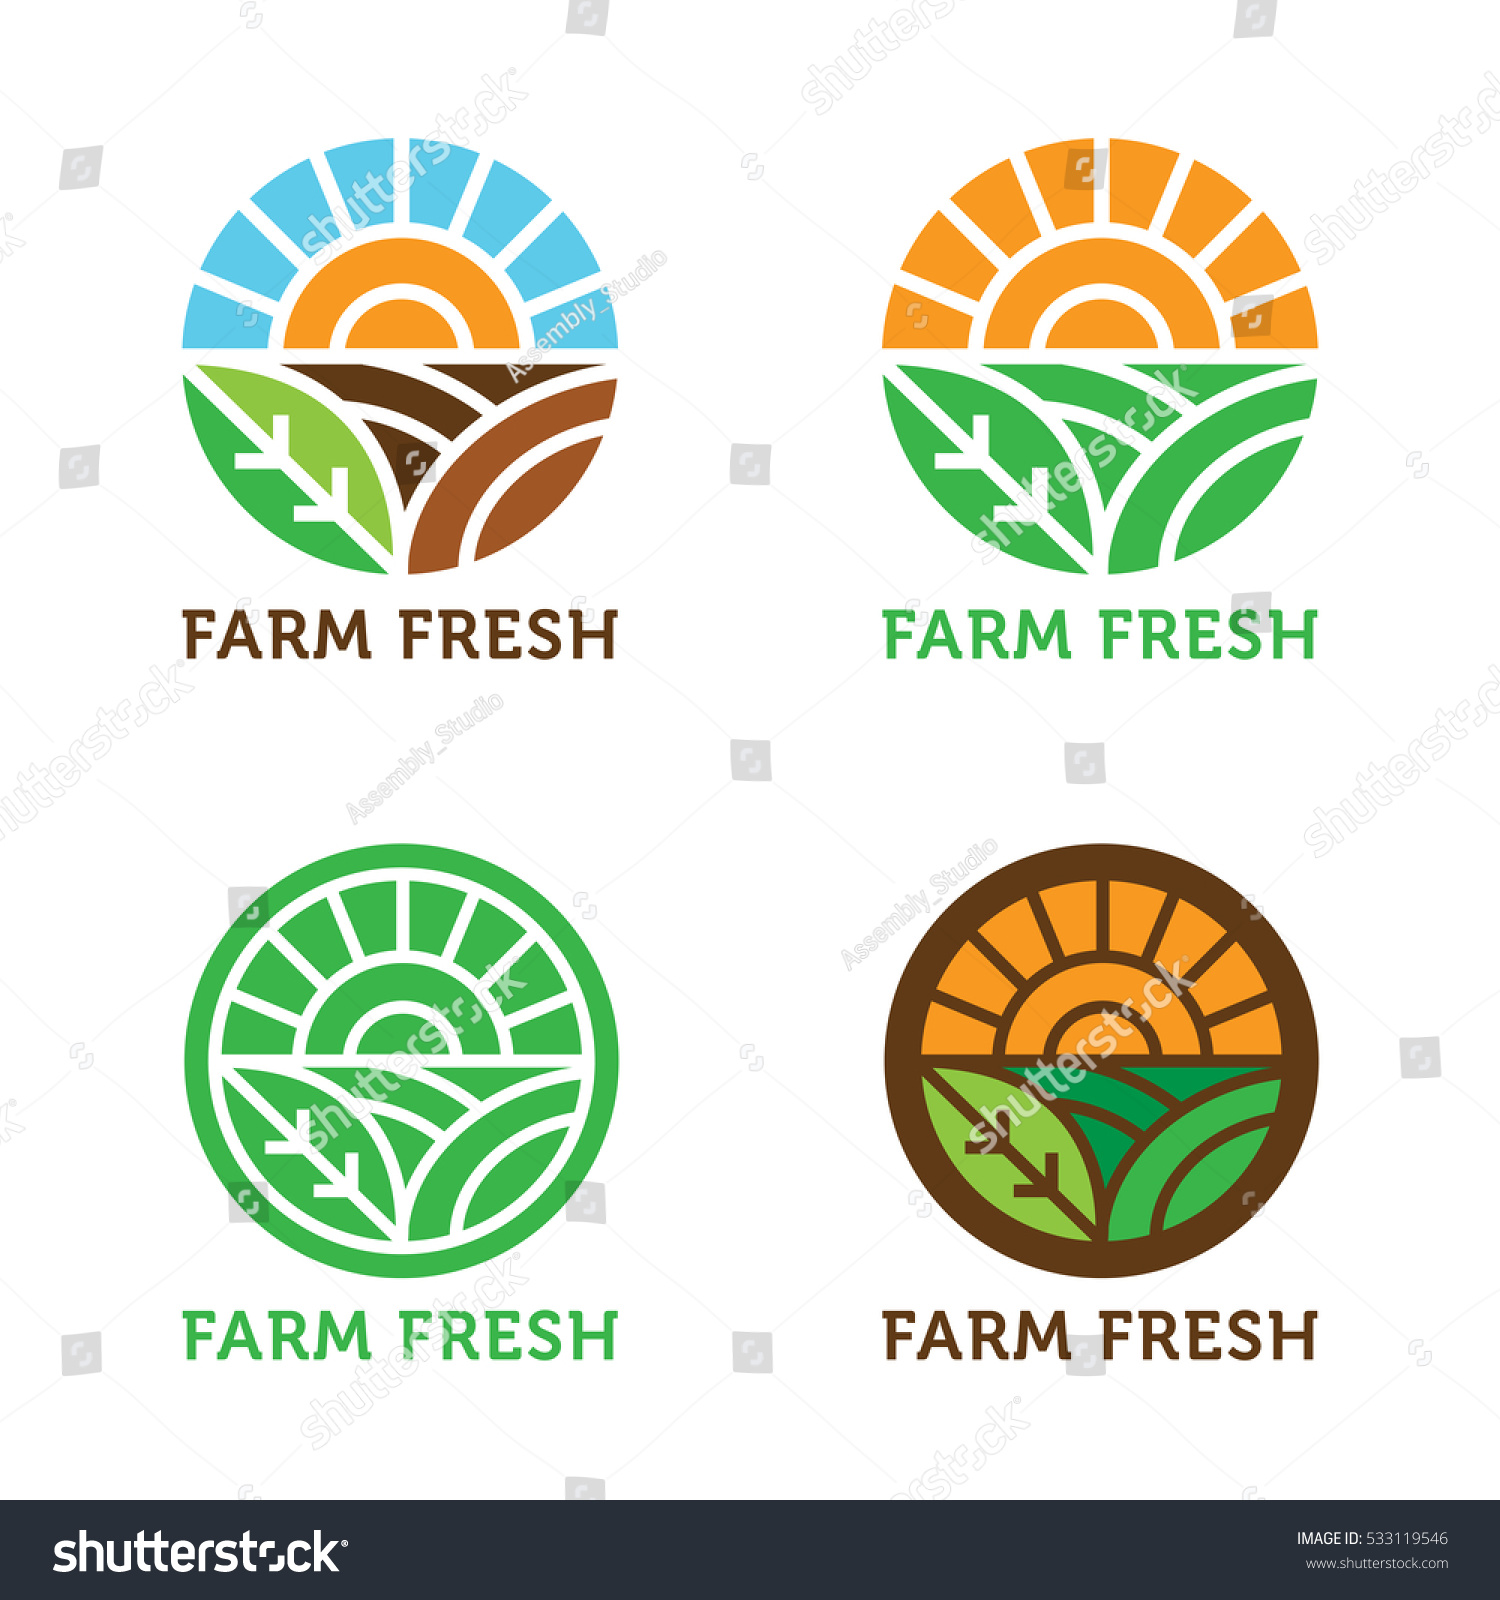 SVG of Circular vector logo. Sun rays over field and crops. Natural, organic, eco, farm, fresh, icon. svg